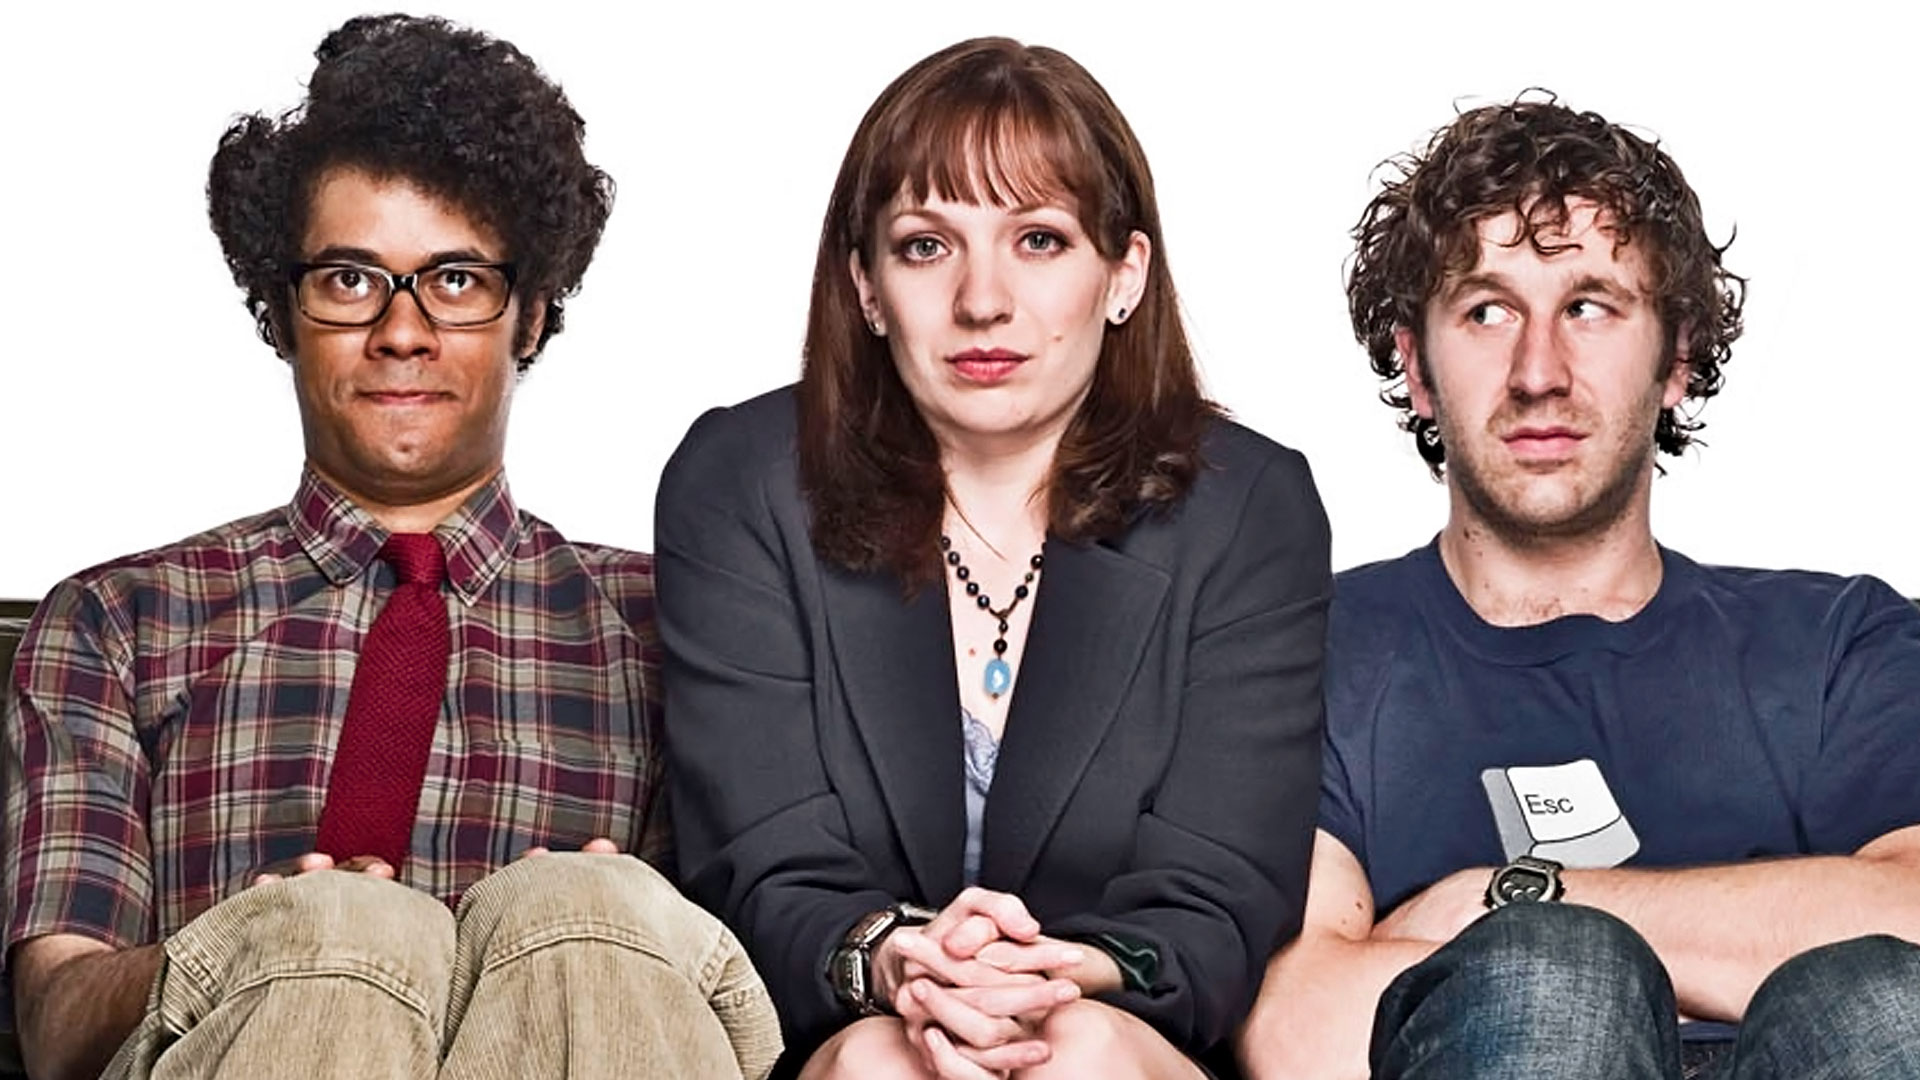 The IT Crowd #1